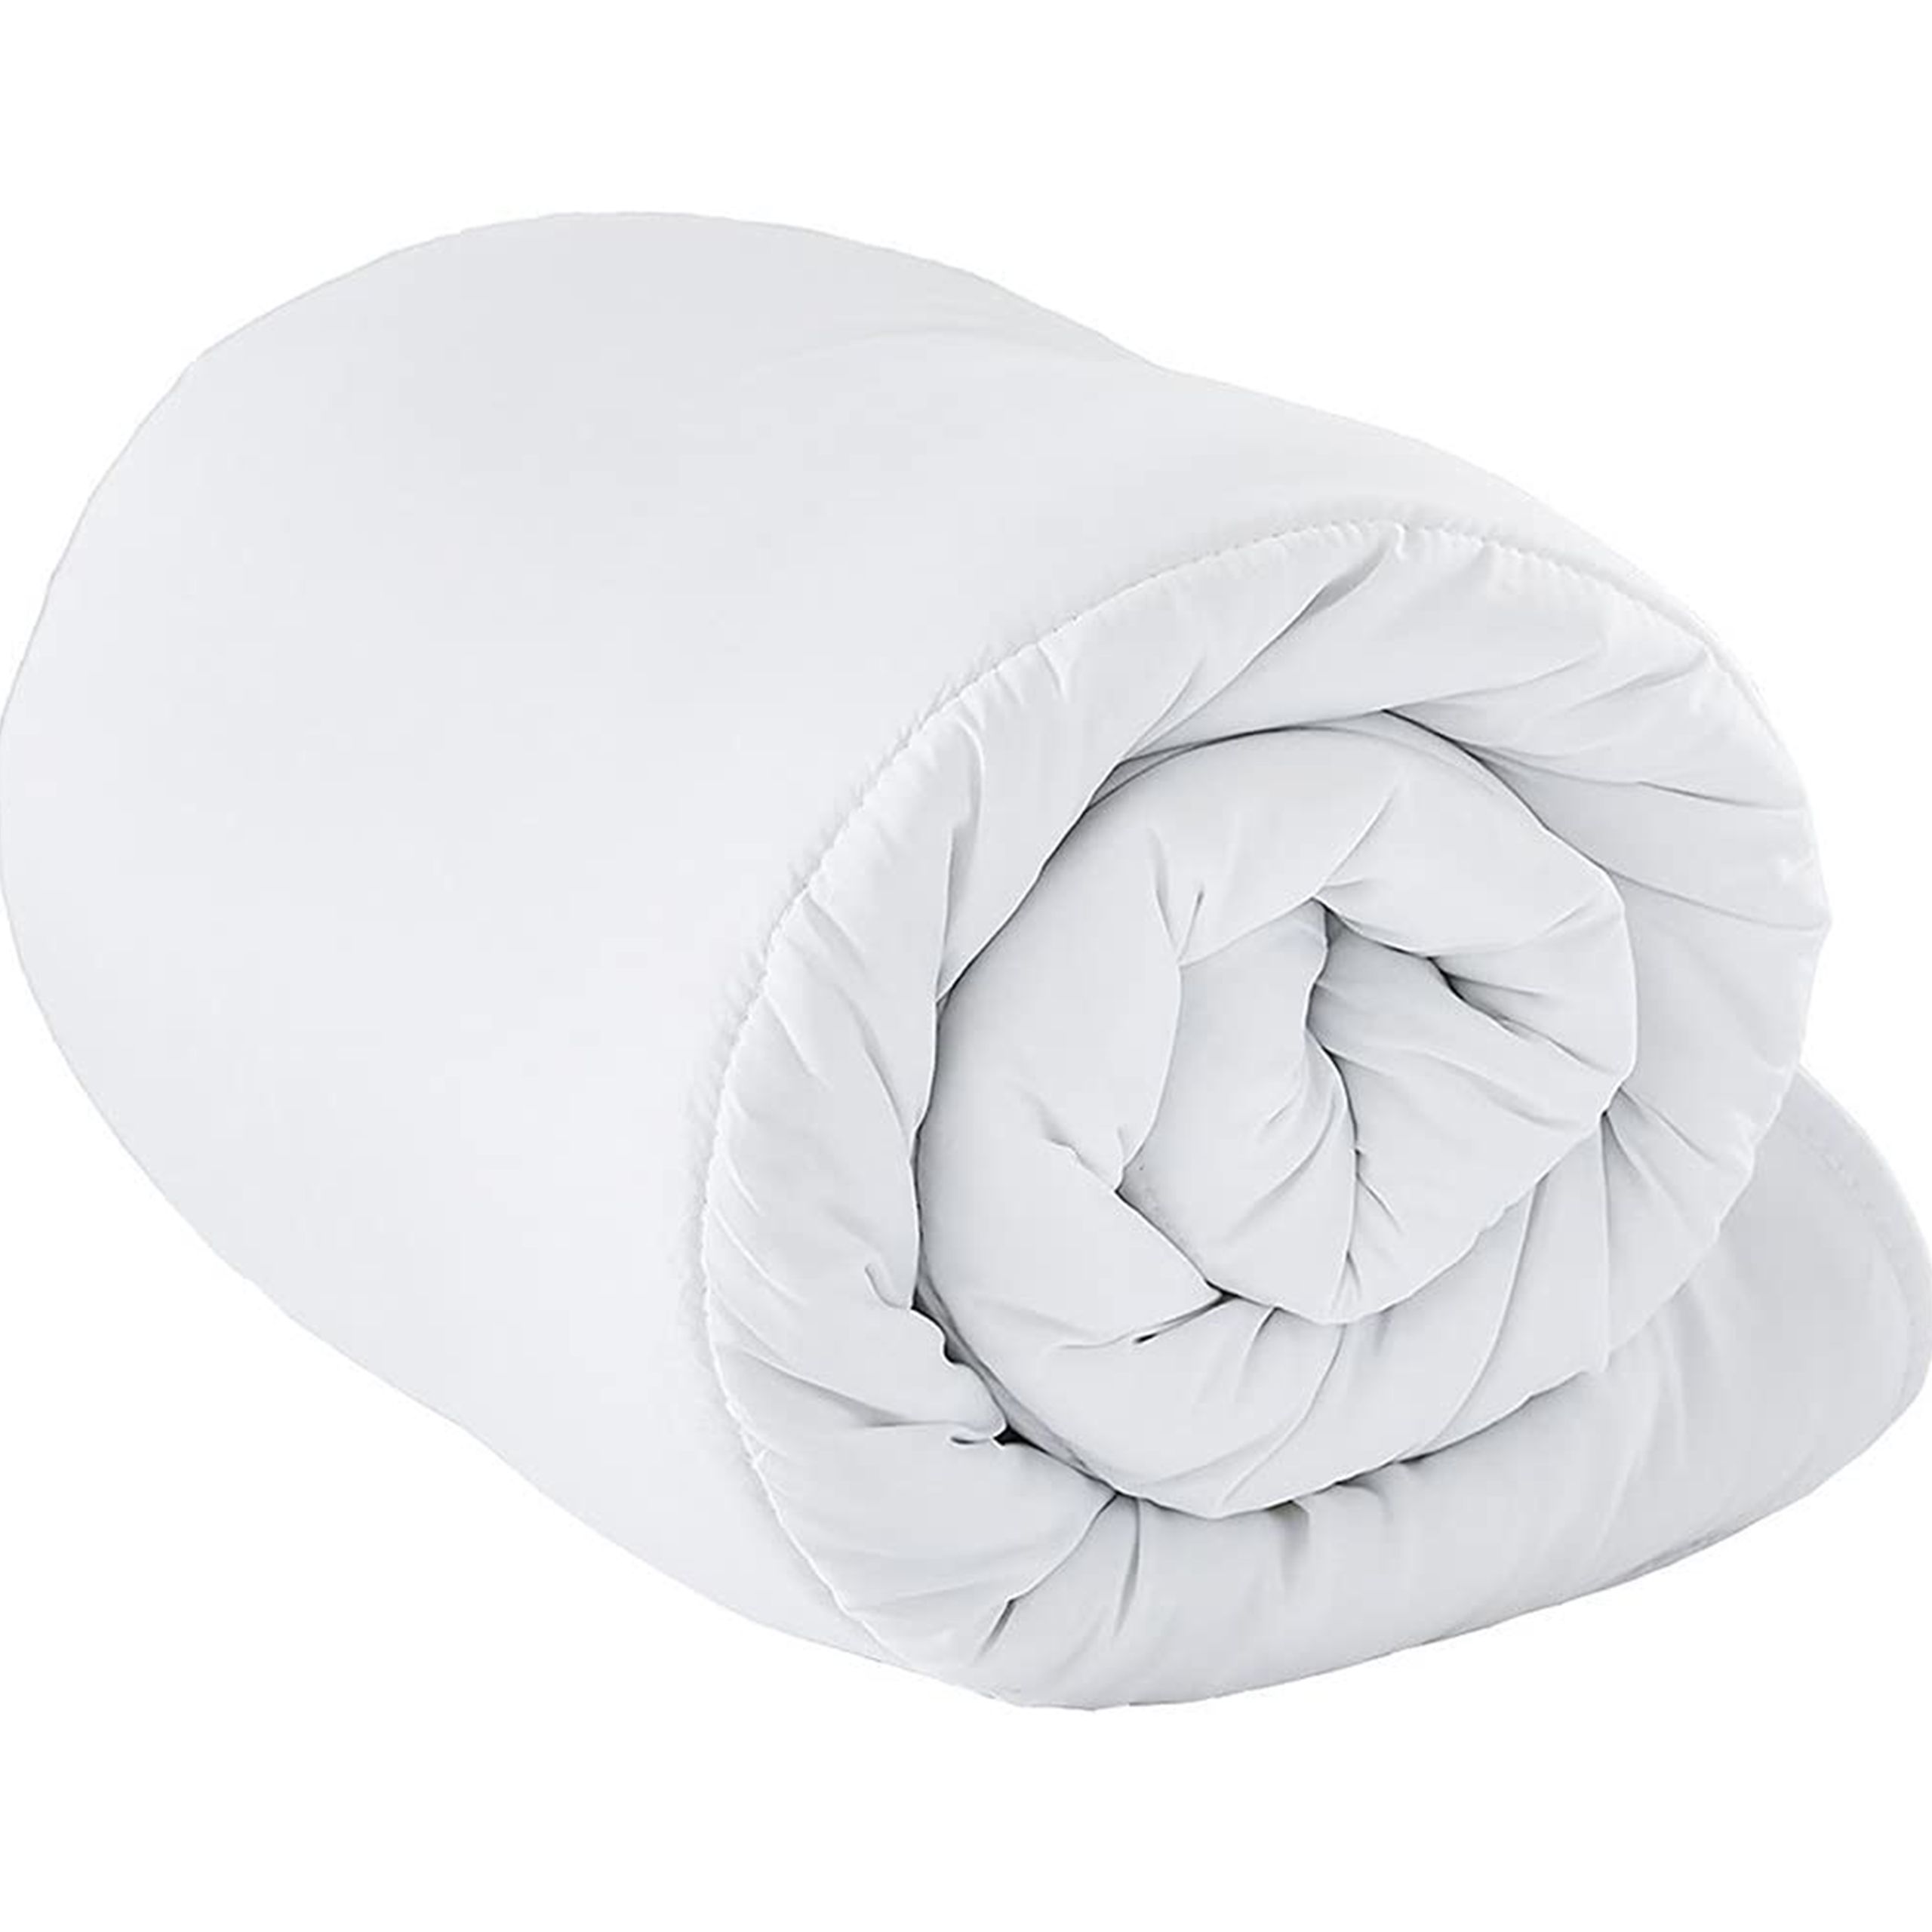 Snuggle up with the Cosy Home quilt. Each quilt comes filled with a special type of lightweight hollowfibre polyester. As the name suggests, each strand of polyester is hollow, which traps air inside and retains heat. This synthetic filling is perfect if you or your family suffer from allergies and react badly to natural filled duvets. With a 10.5 Tog rating and high quality synthetic fabric, this hollowfibre quilt is the perfect, great value choice for a guaranteed nights sleep all year round. Fully machine washable this quilt is a dream to care for.